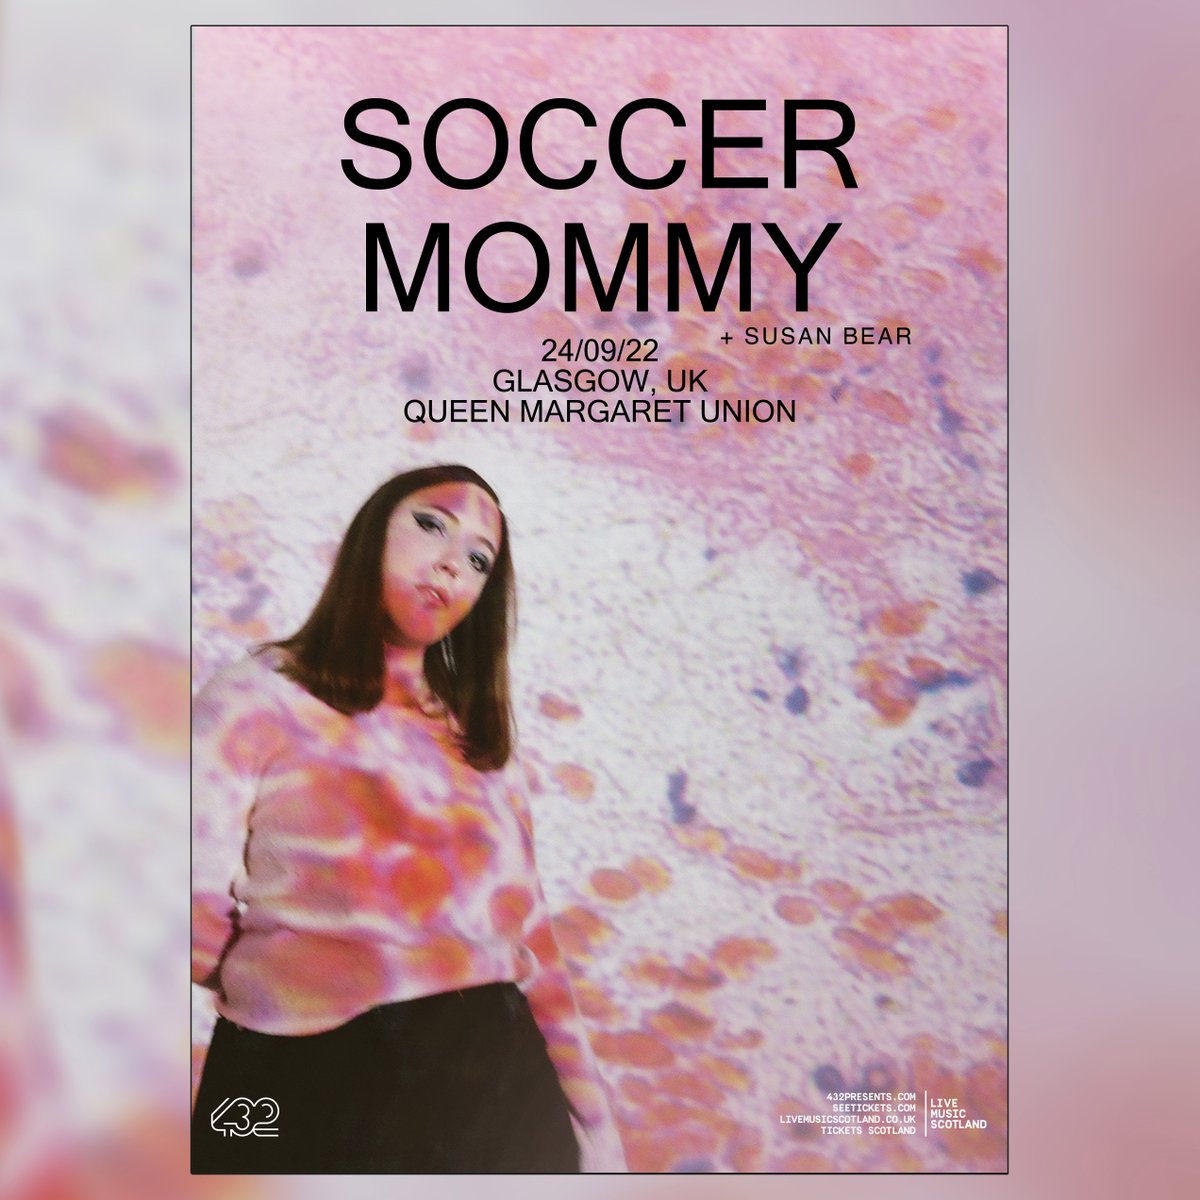 TONIGHT!! Soccer Mommy (@sopharela) heads to @GlasgowQMU with the excellent @GoodDogSuse! 🎉 🎟 Final tickets here: bit.ly/3L50EHl